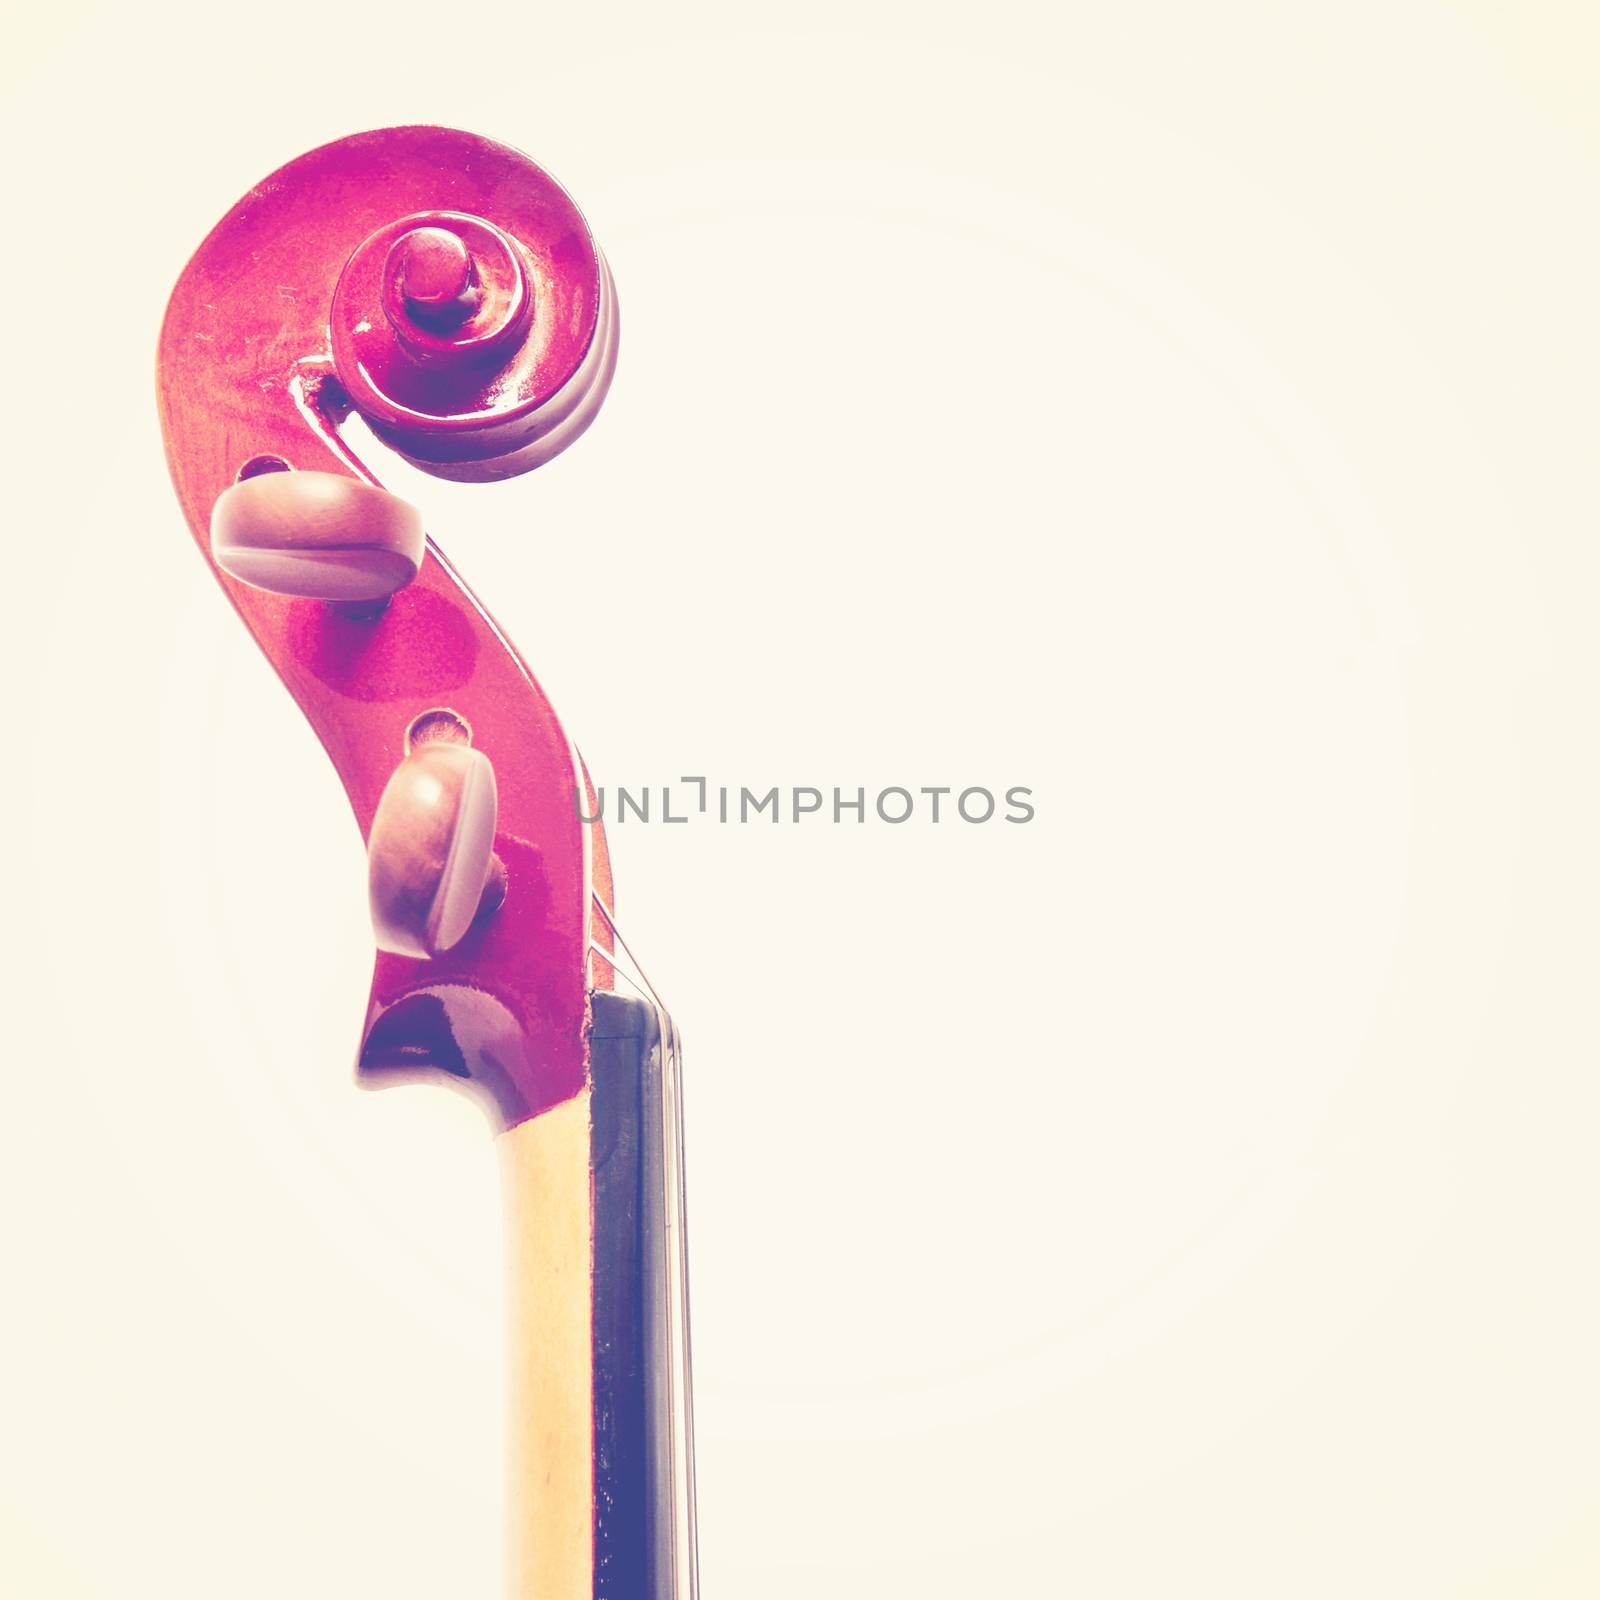 Details of violin head with retro filter effect